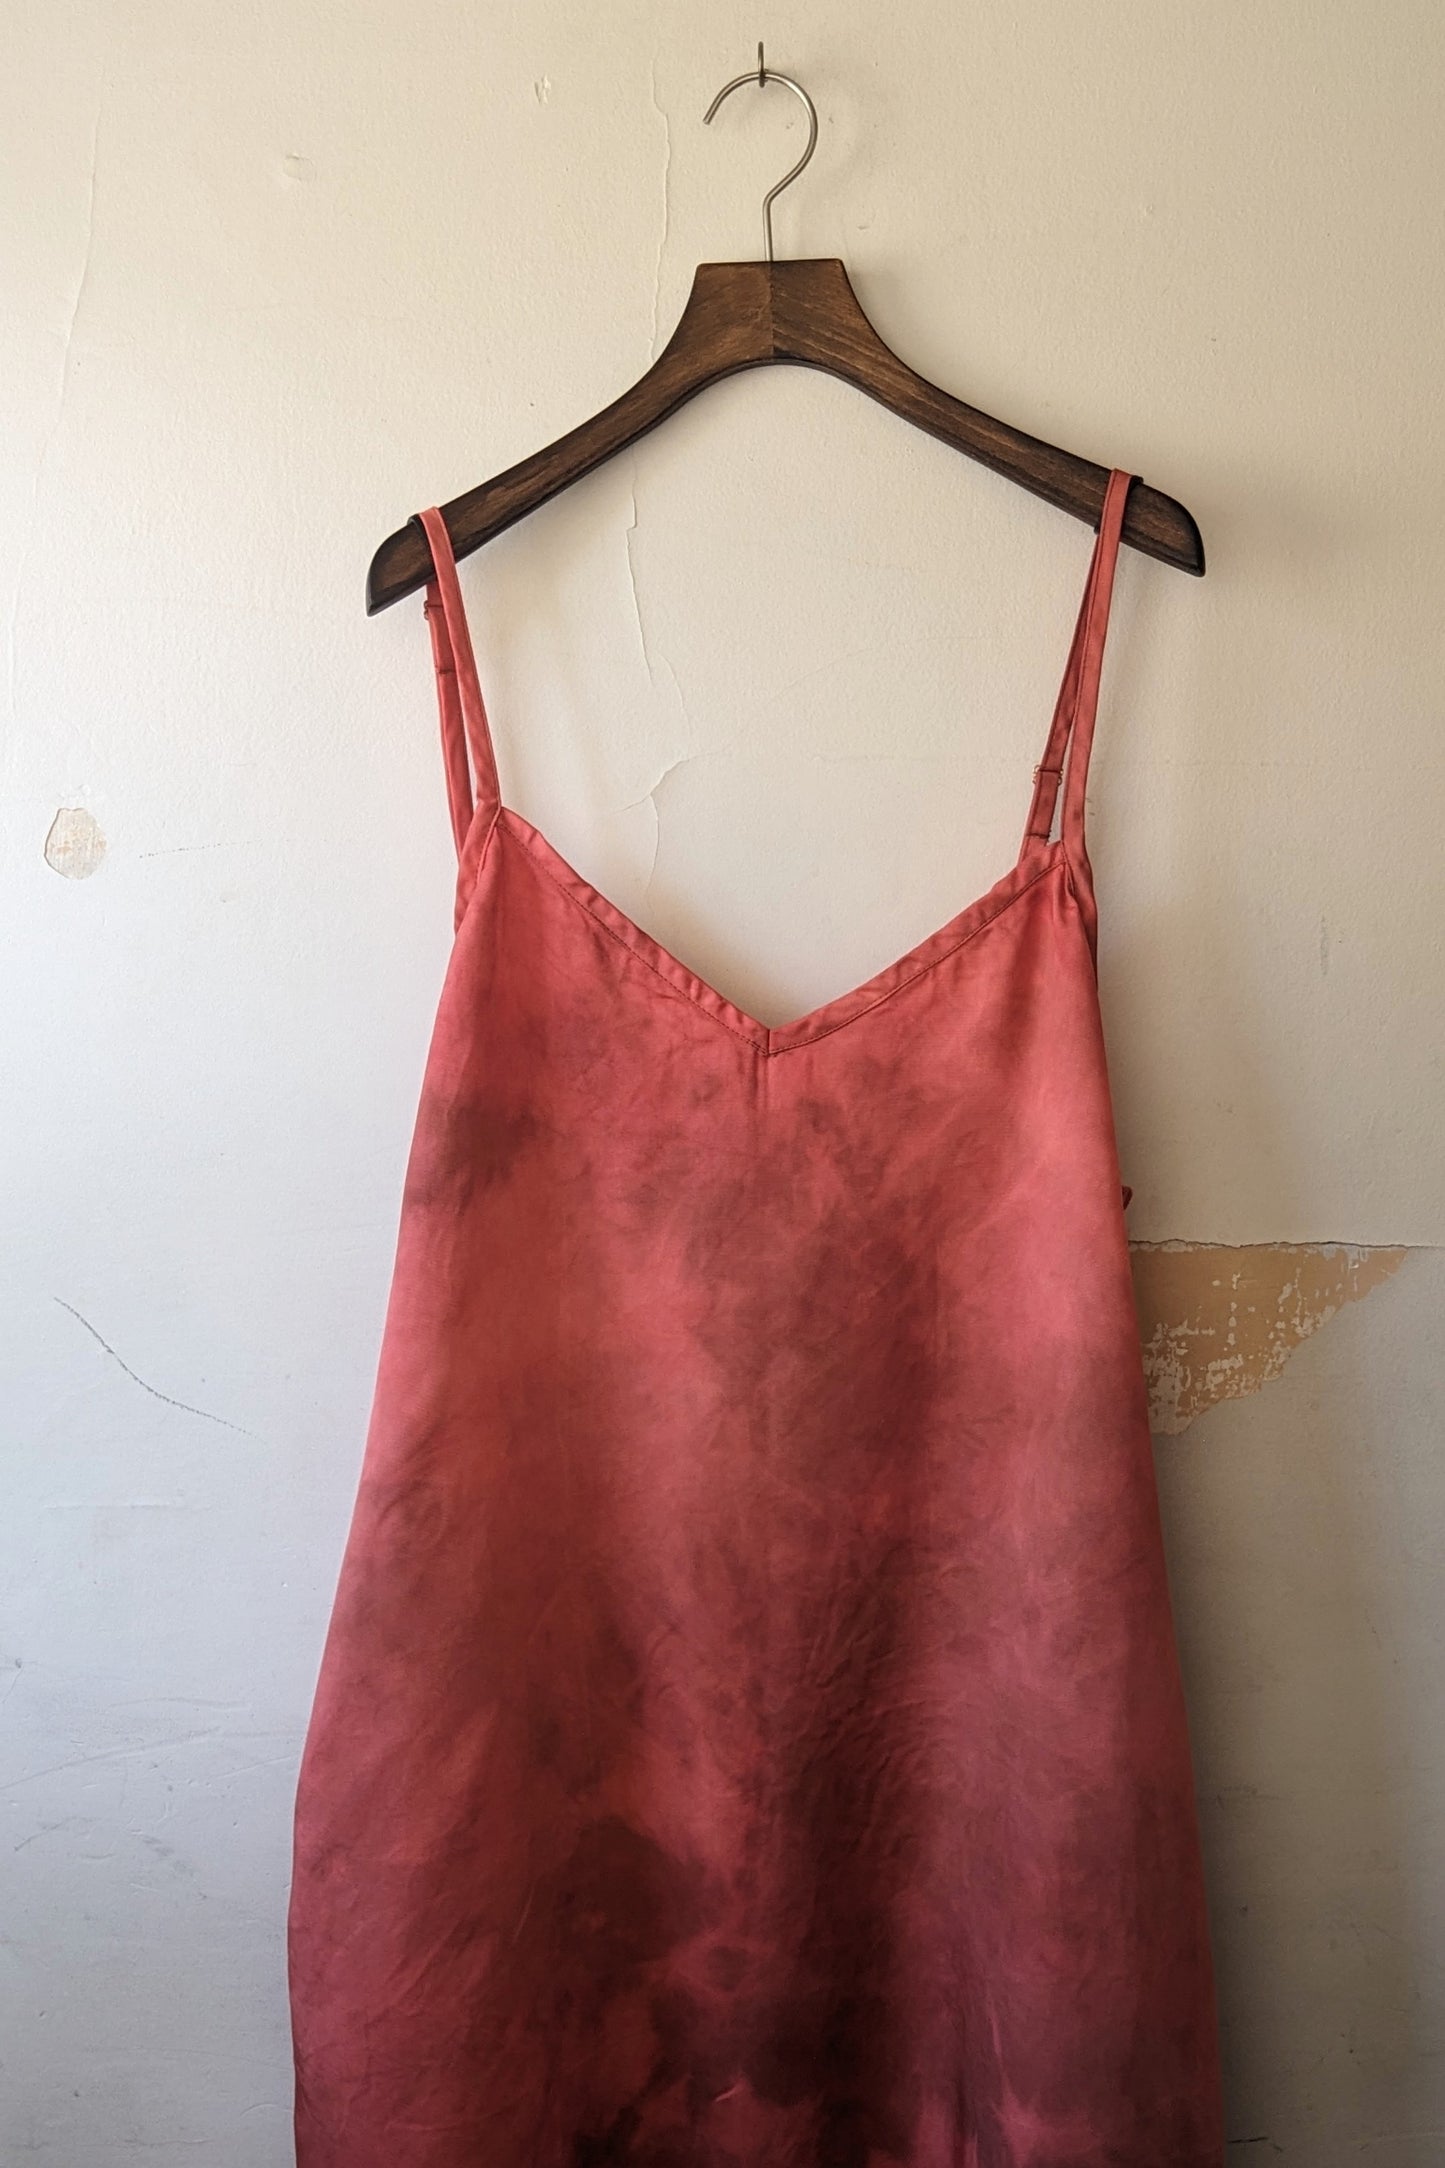 Franka Slip Dress - Hand-Dyed Guava by Connally Goods